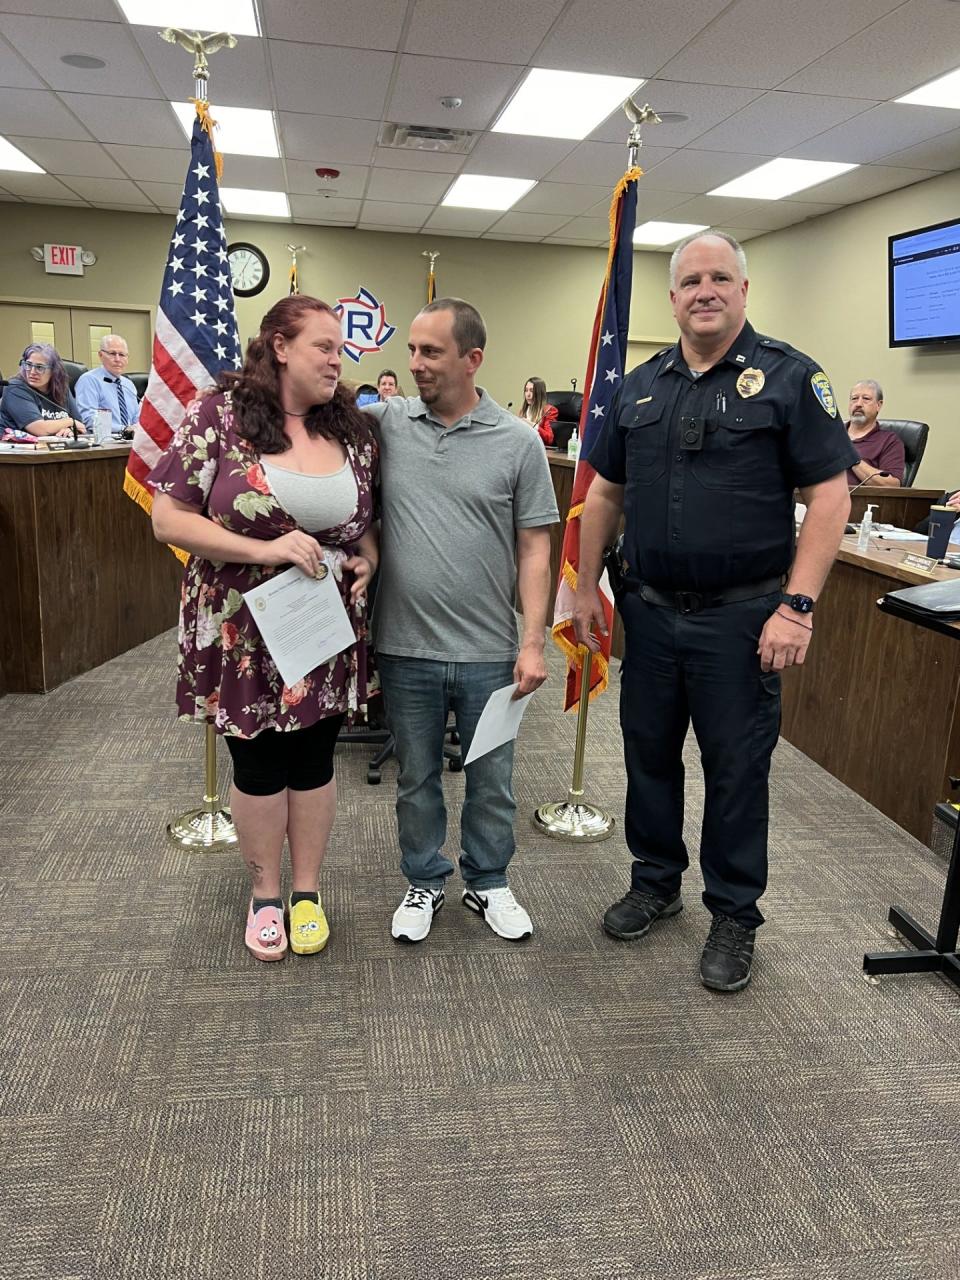 Brittanie Larson and Christopher Taylor were presented with Lifesaving Awards for their work in evacuating their neighbors after a fire at their Hazen Street apartment building. From left are Larson, Taylor and Capt. Jake Smallfield.